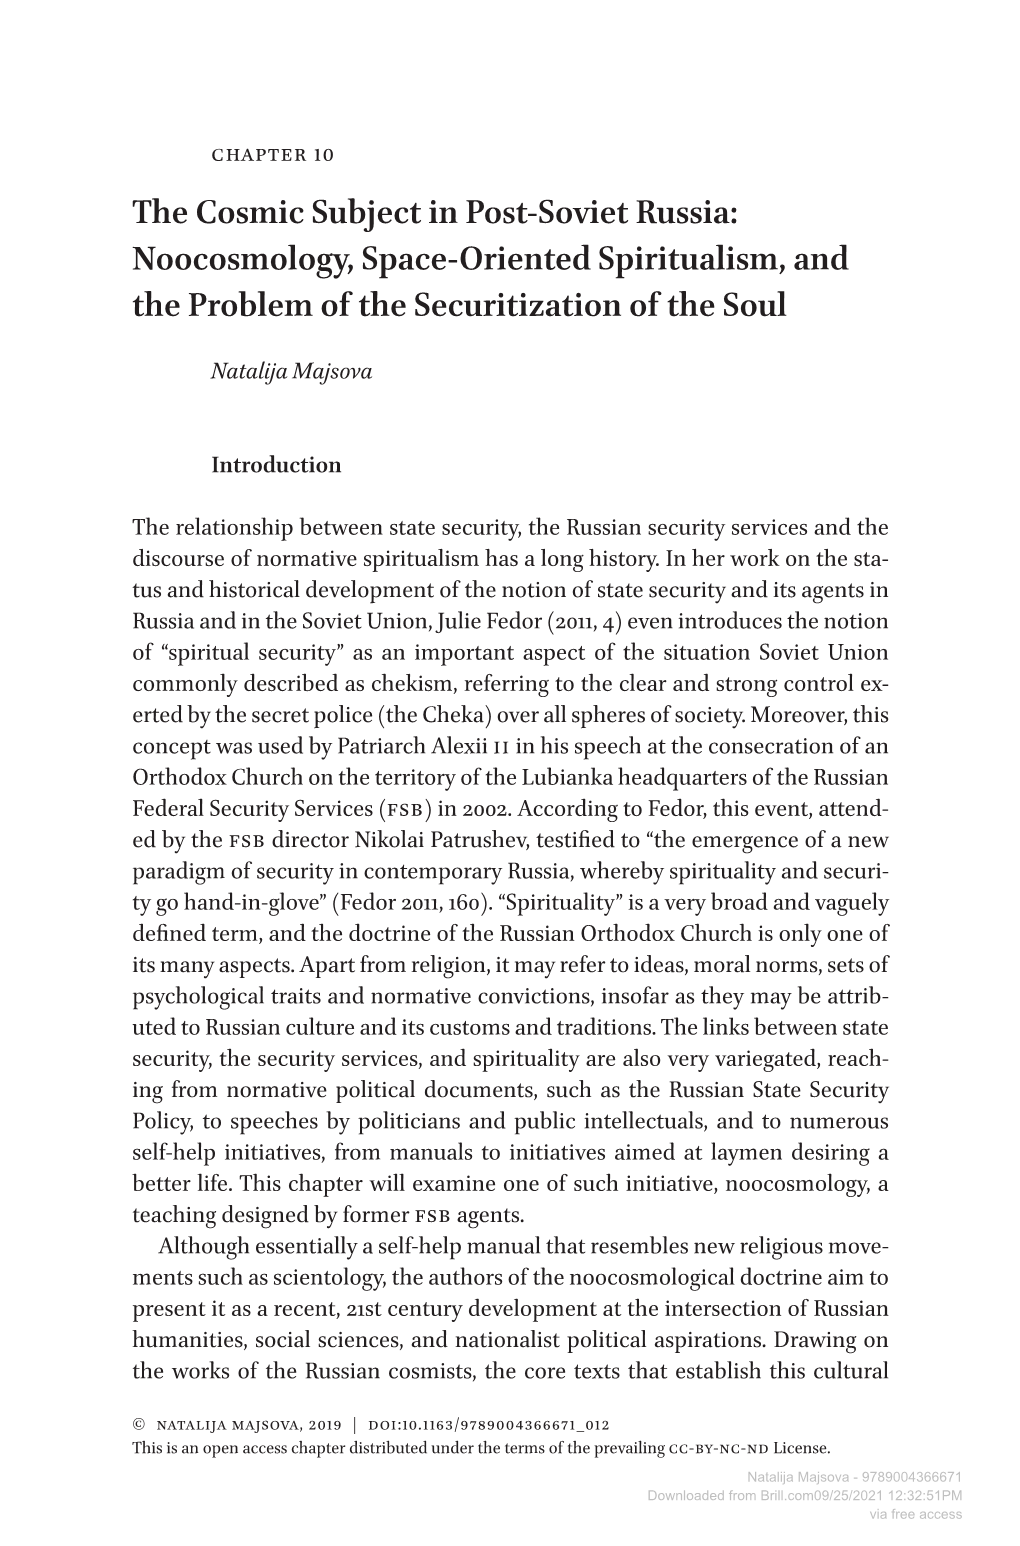 The Cosmic Subject in Post-Soviet Russia: Noocosmology, Space-Oriented Spiritualism, and the Problem of the Securitization of the Soul